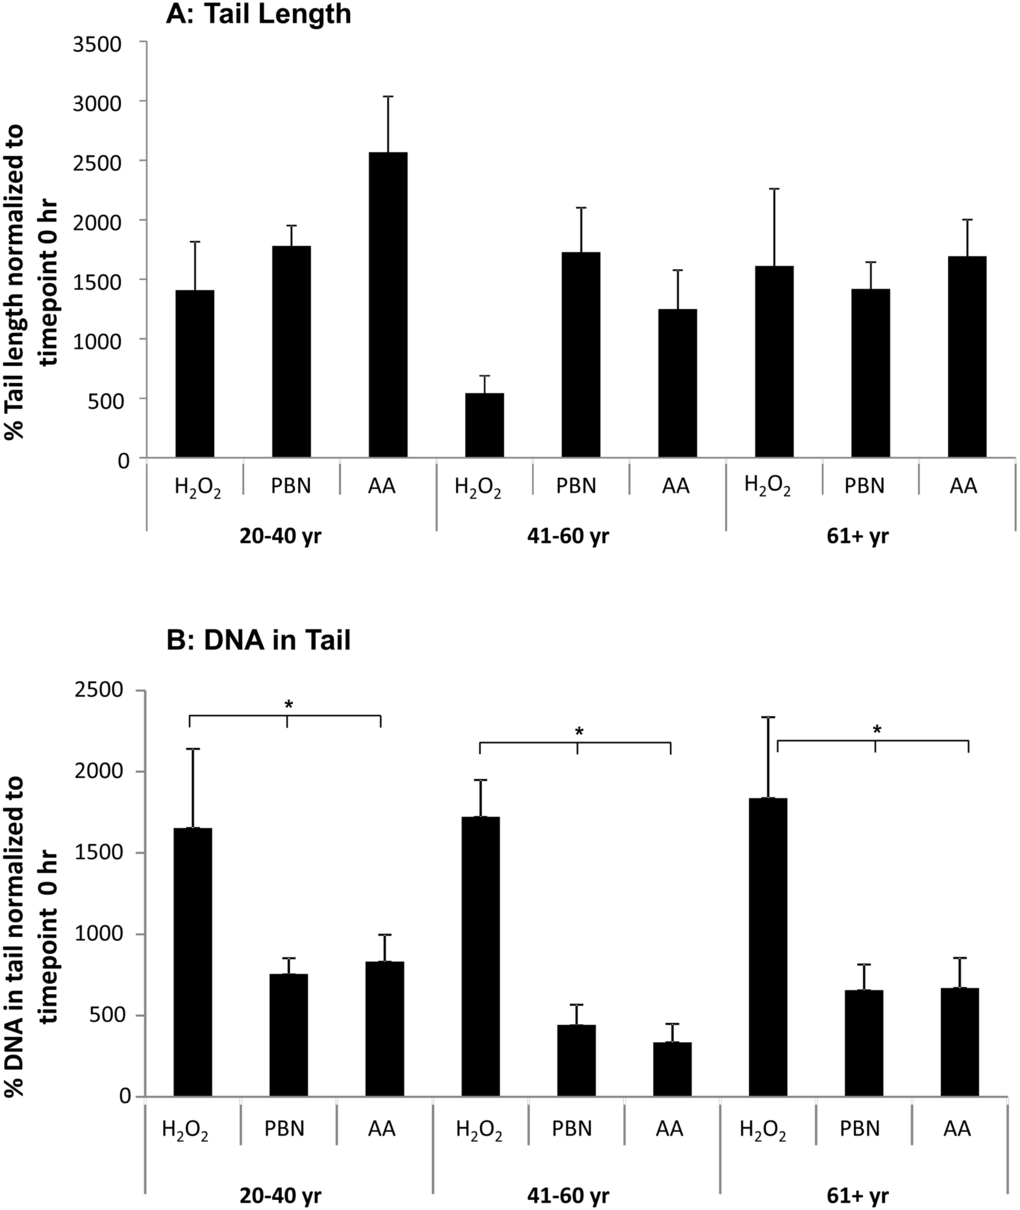 PBN and AA reduce DNA damage in H2O2-treated ADSCs. ADSCs from young, middle-aged, and older sources were preincubated for 24 hours with either PBN or AA and then treated with H2O2 for 30 minutes. (A) ADSCs preincubated with either PBN or AA displayed comparable % tail lengths to the controls, which were treated with H2O2 alone and not preincubated with PBN or AA. (B) ADSCs preincubated with either PBN or AA showed a significant reduction in % tail DNA compared to the controls. This was true for ADSCs derived from each age group. * indicates p 